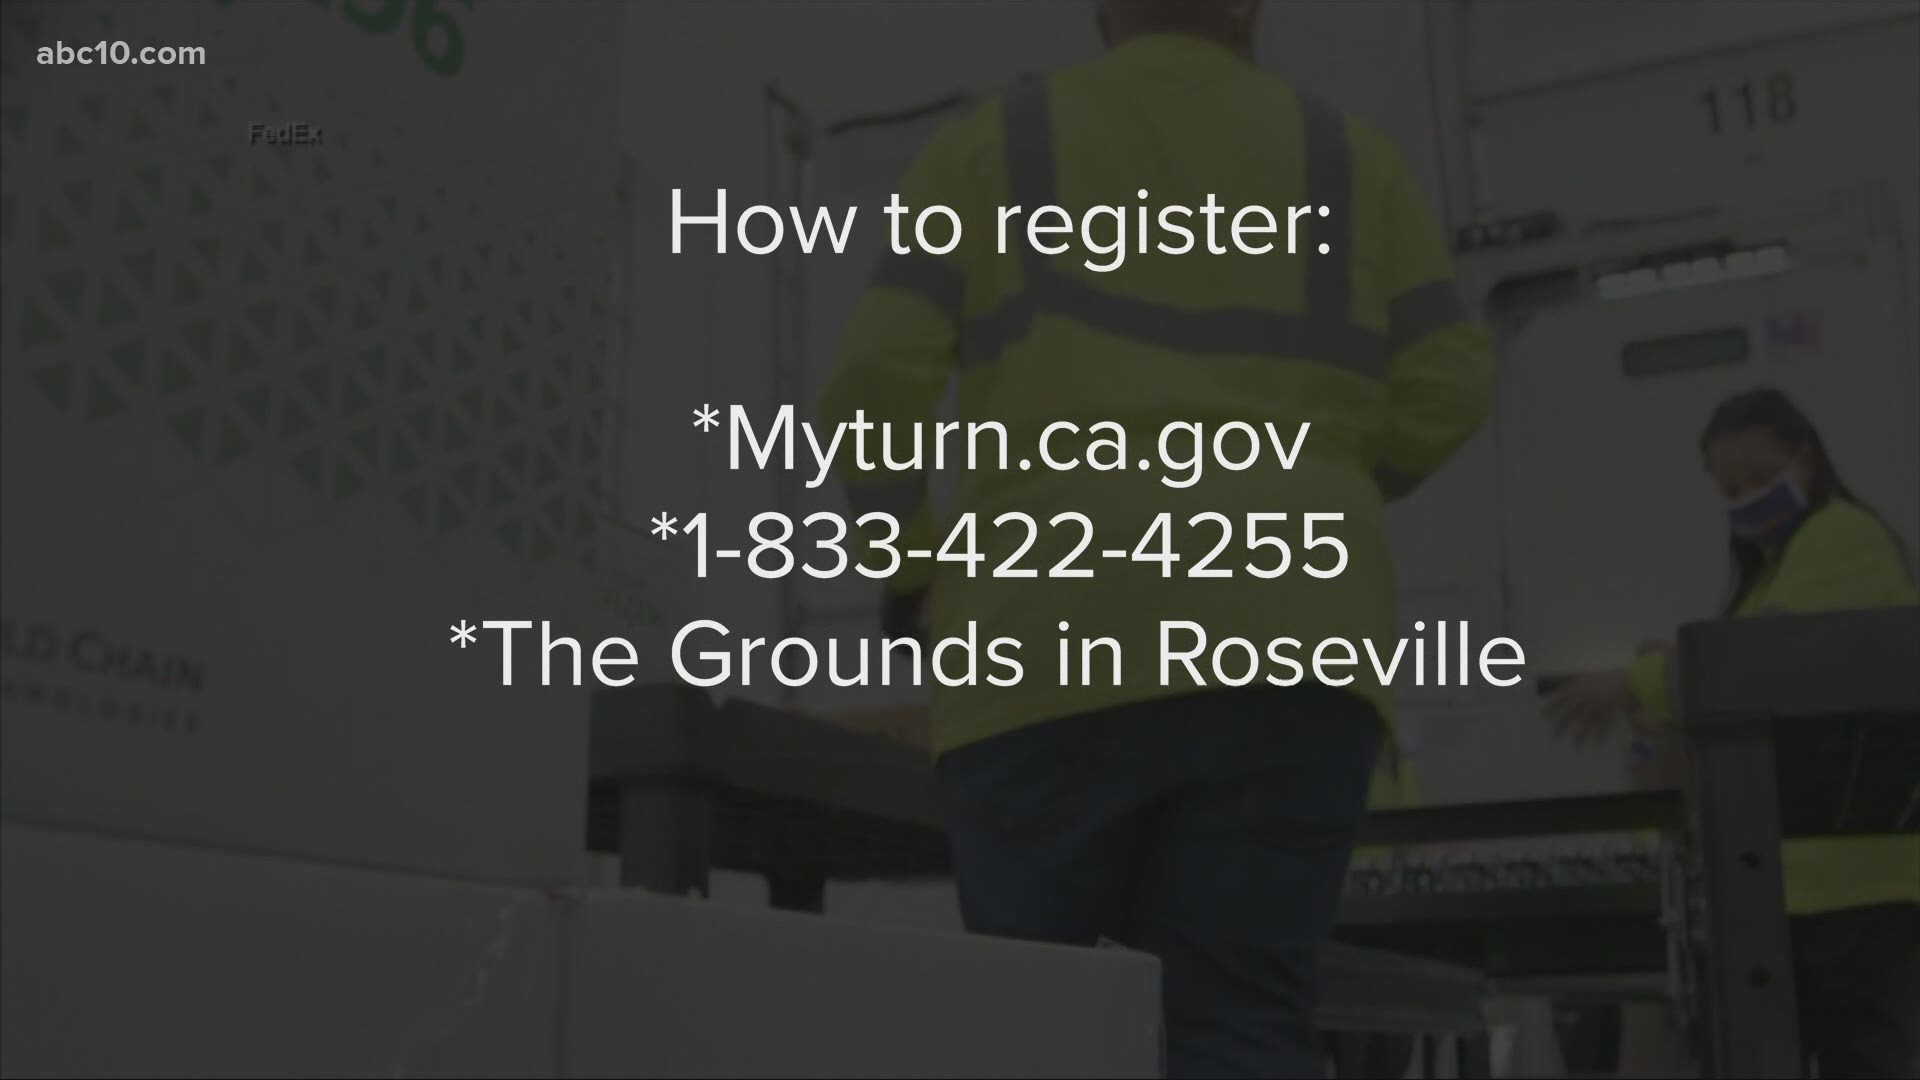 County health officials are urging people to register for one of the 2,000 vaccine appointments available @The Grounds in Roseville.